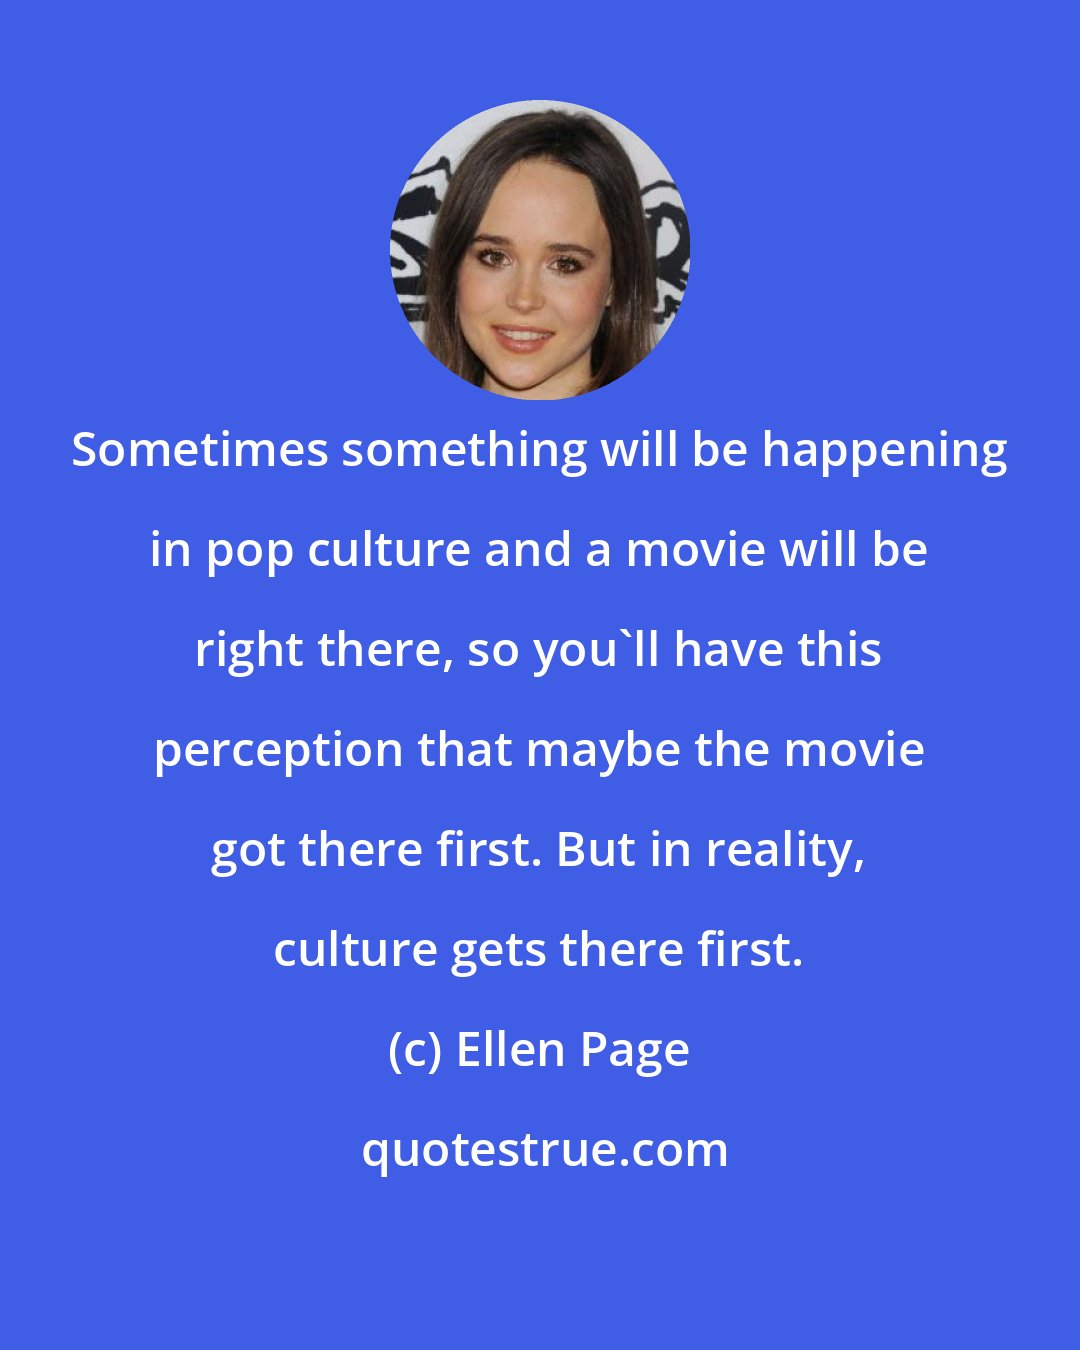 Ellen Page: Sometimes something will be happening in pop culture and a movie will be right there, so you'll have this perception that maybe the movie got there first. But in reality, culture gets there first.